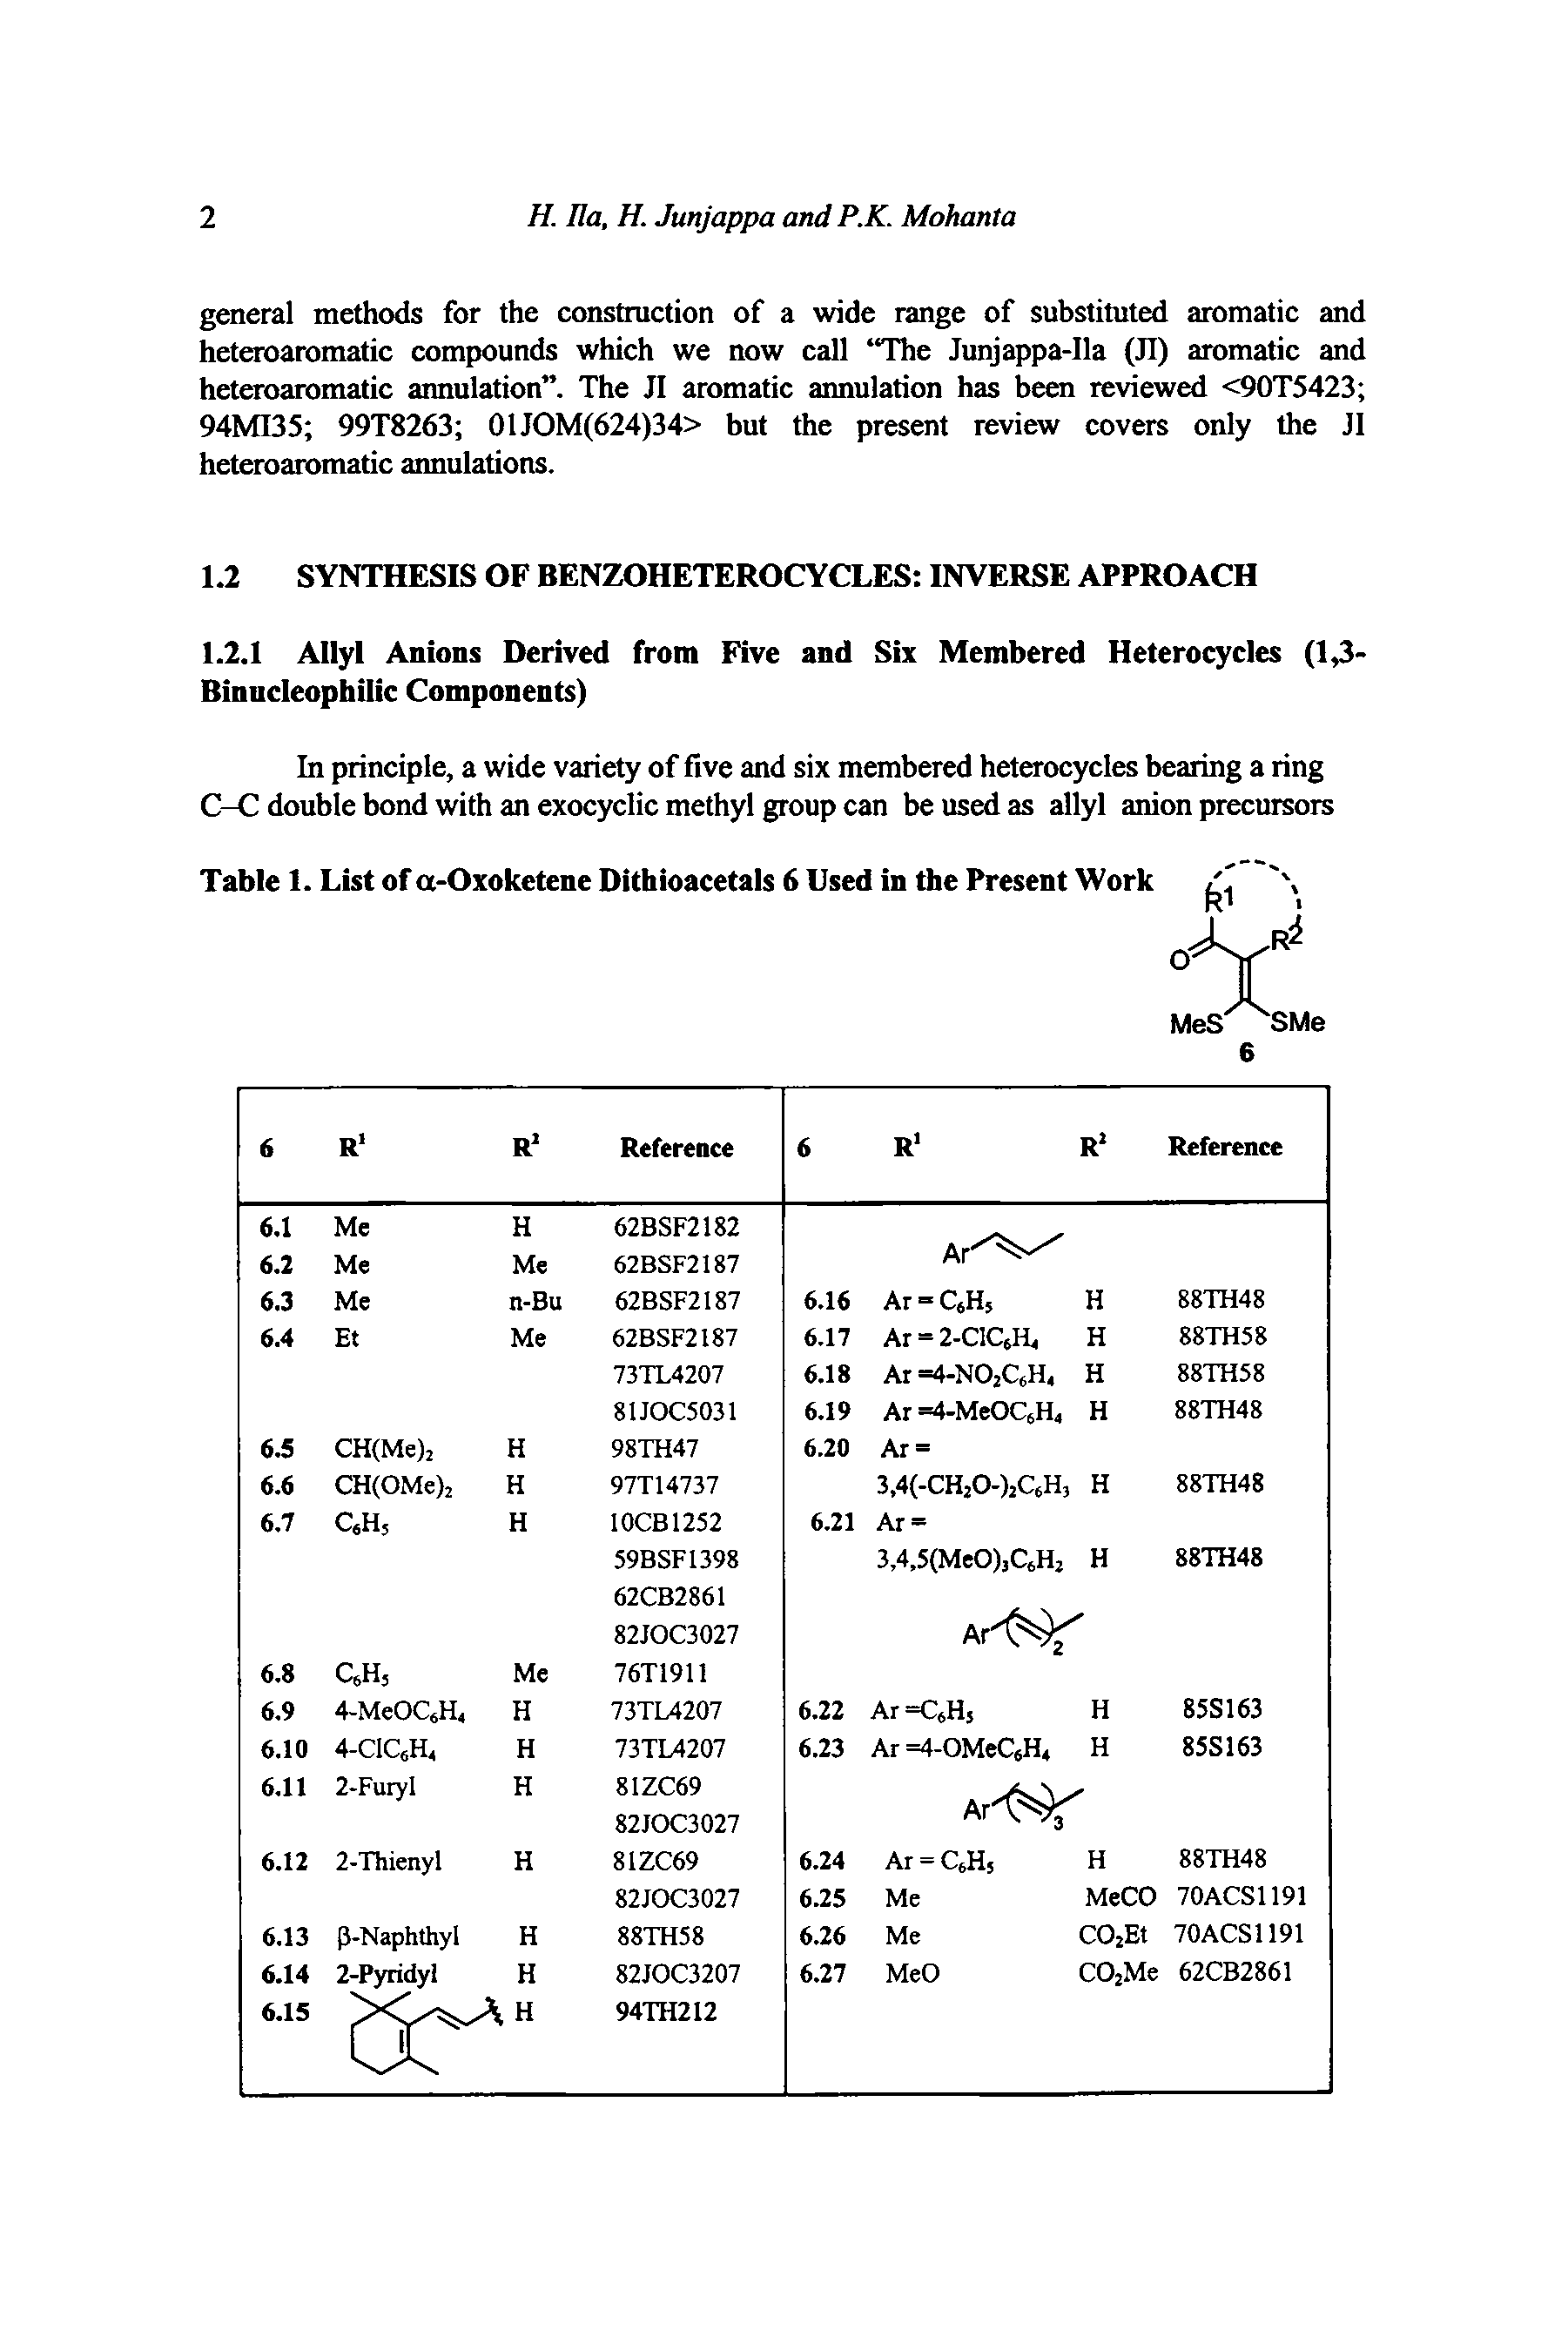 Table 1. List of a-Oxoketene Dithioacetals 6 Used in the Present Work ...